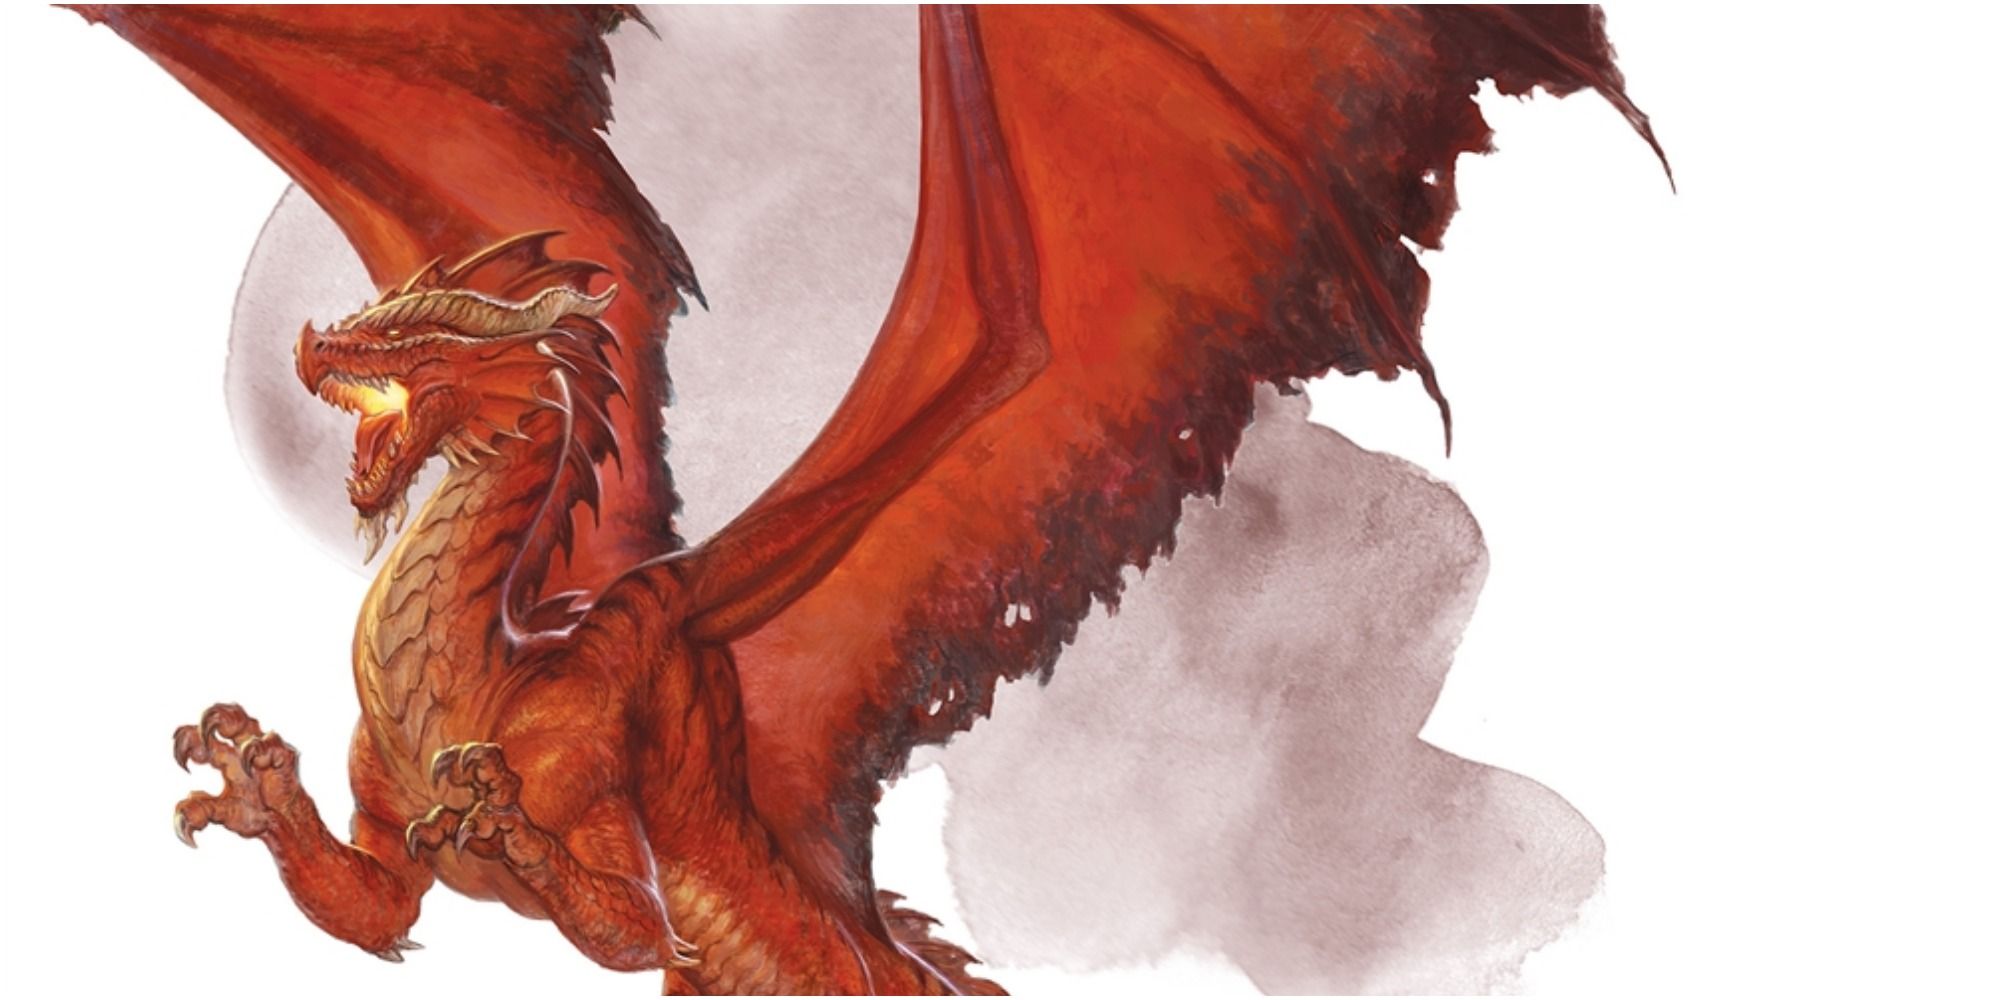 An image of an Ancient Red Dragon breathing fire in DnD